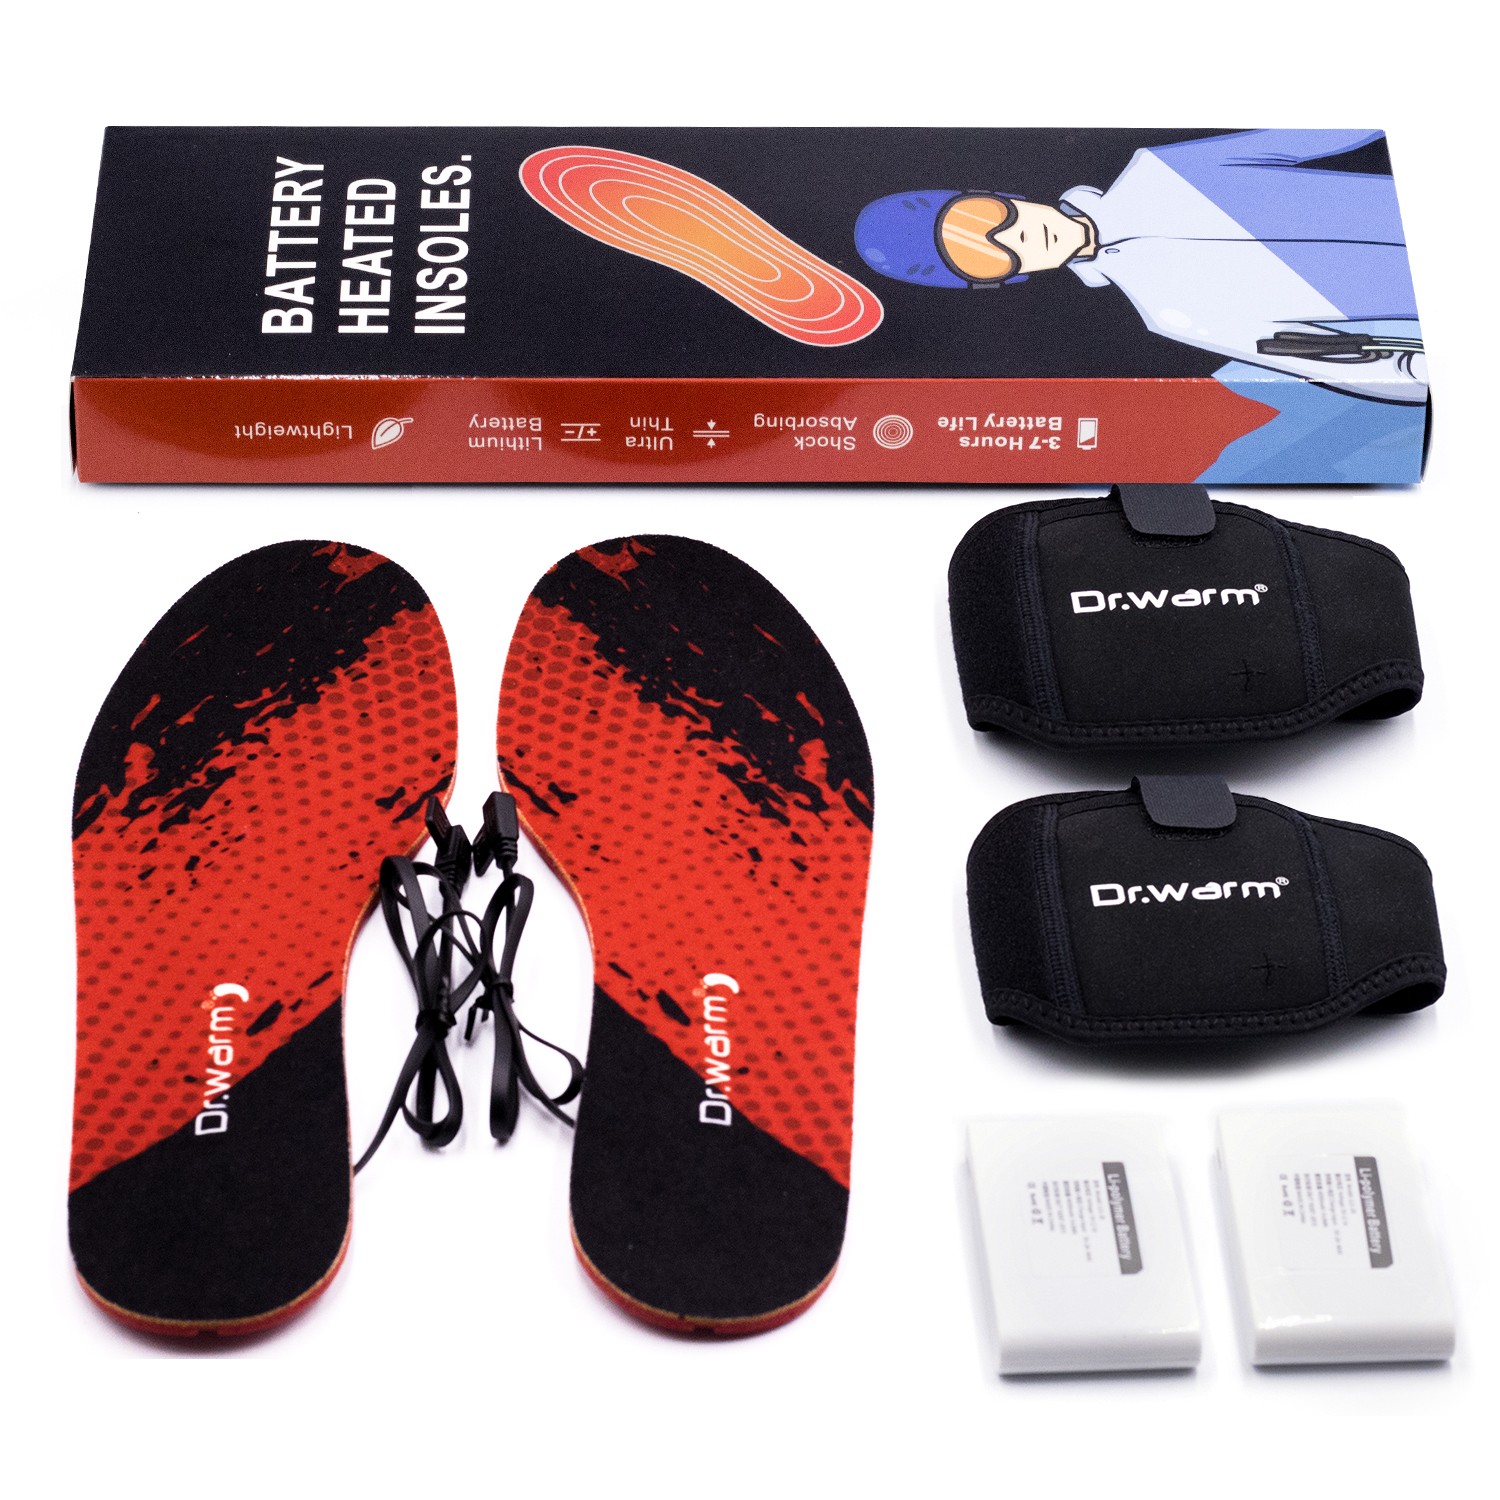 Dr. Warm electric heated insoles-22